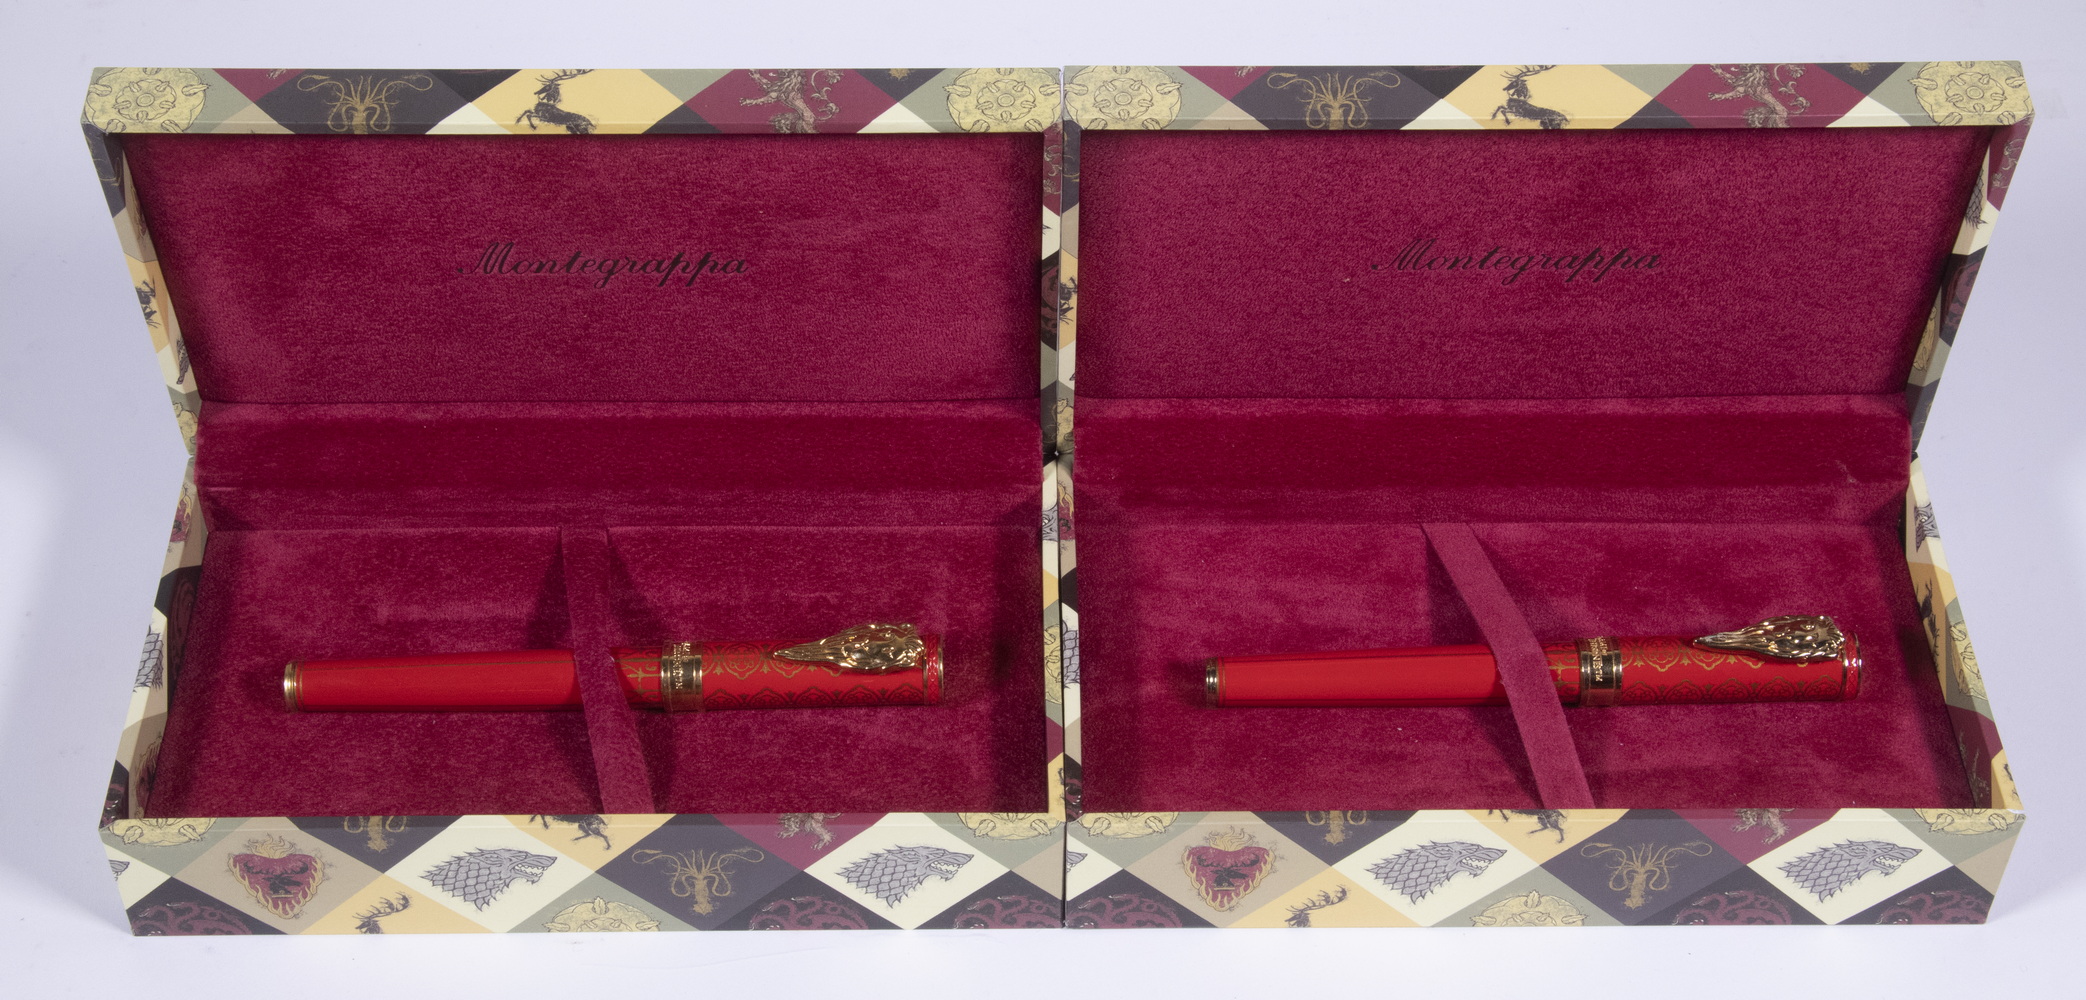 CASED MONTEGRAPPA GAME OF THRONES  3020d2